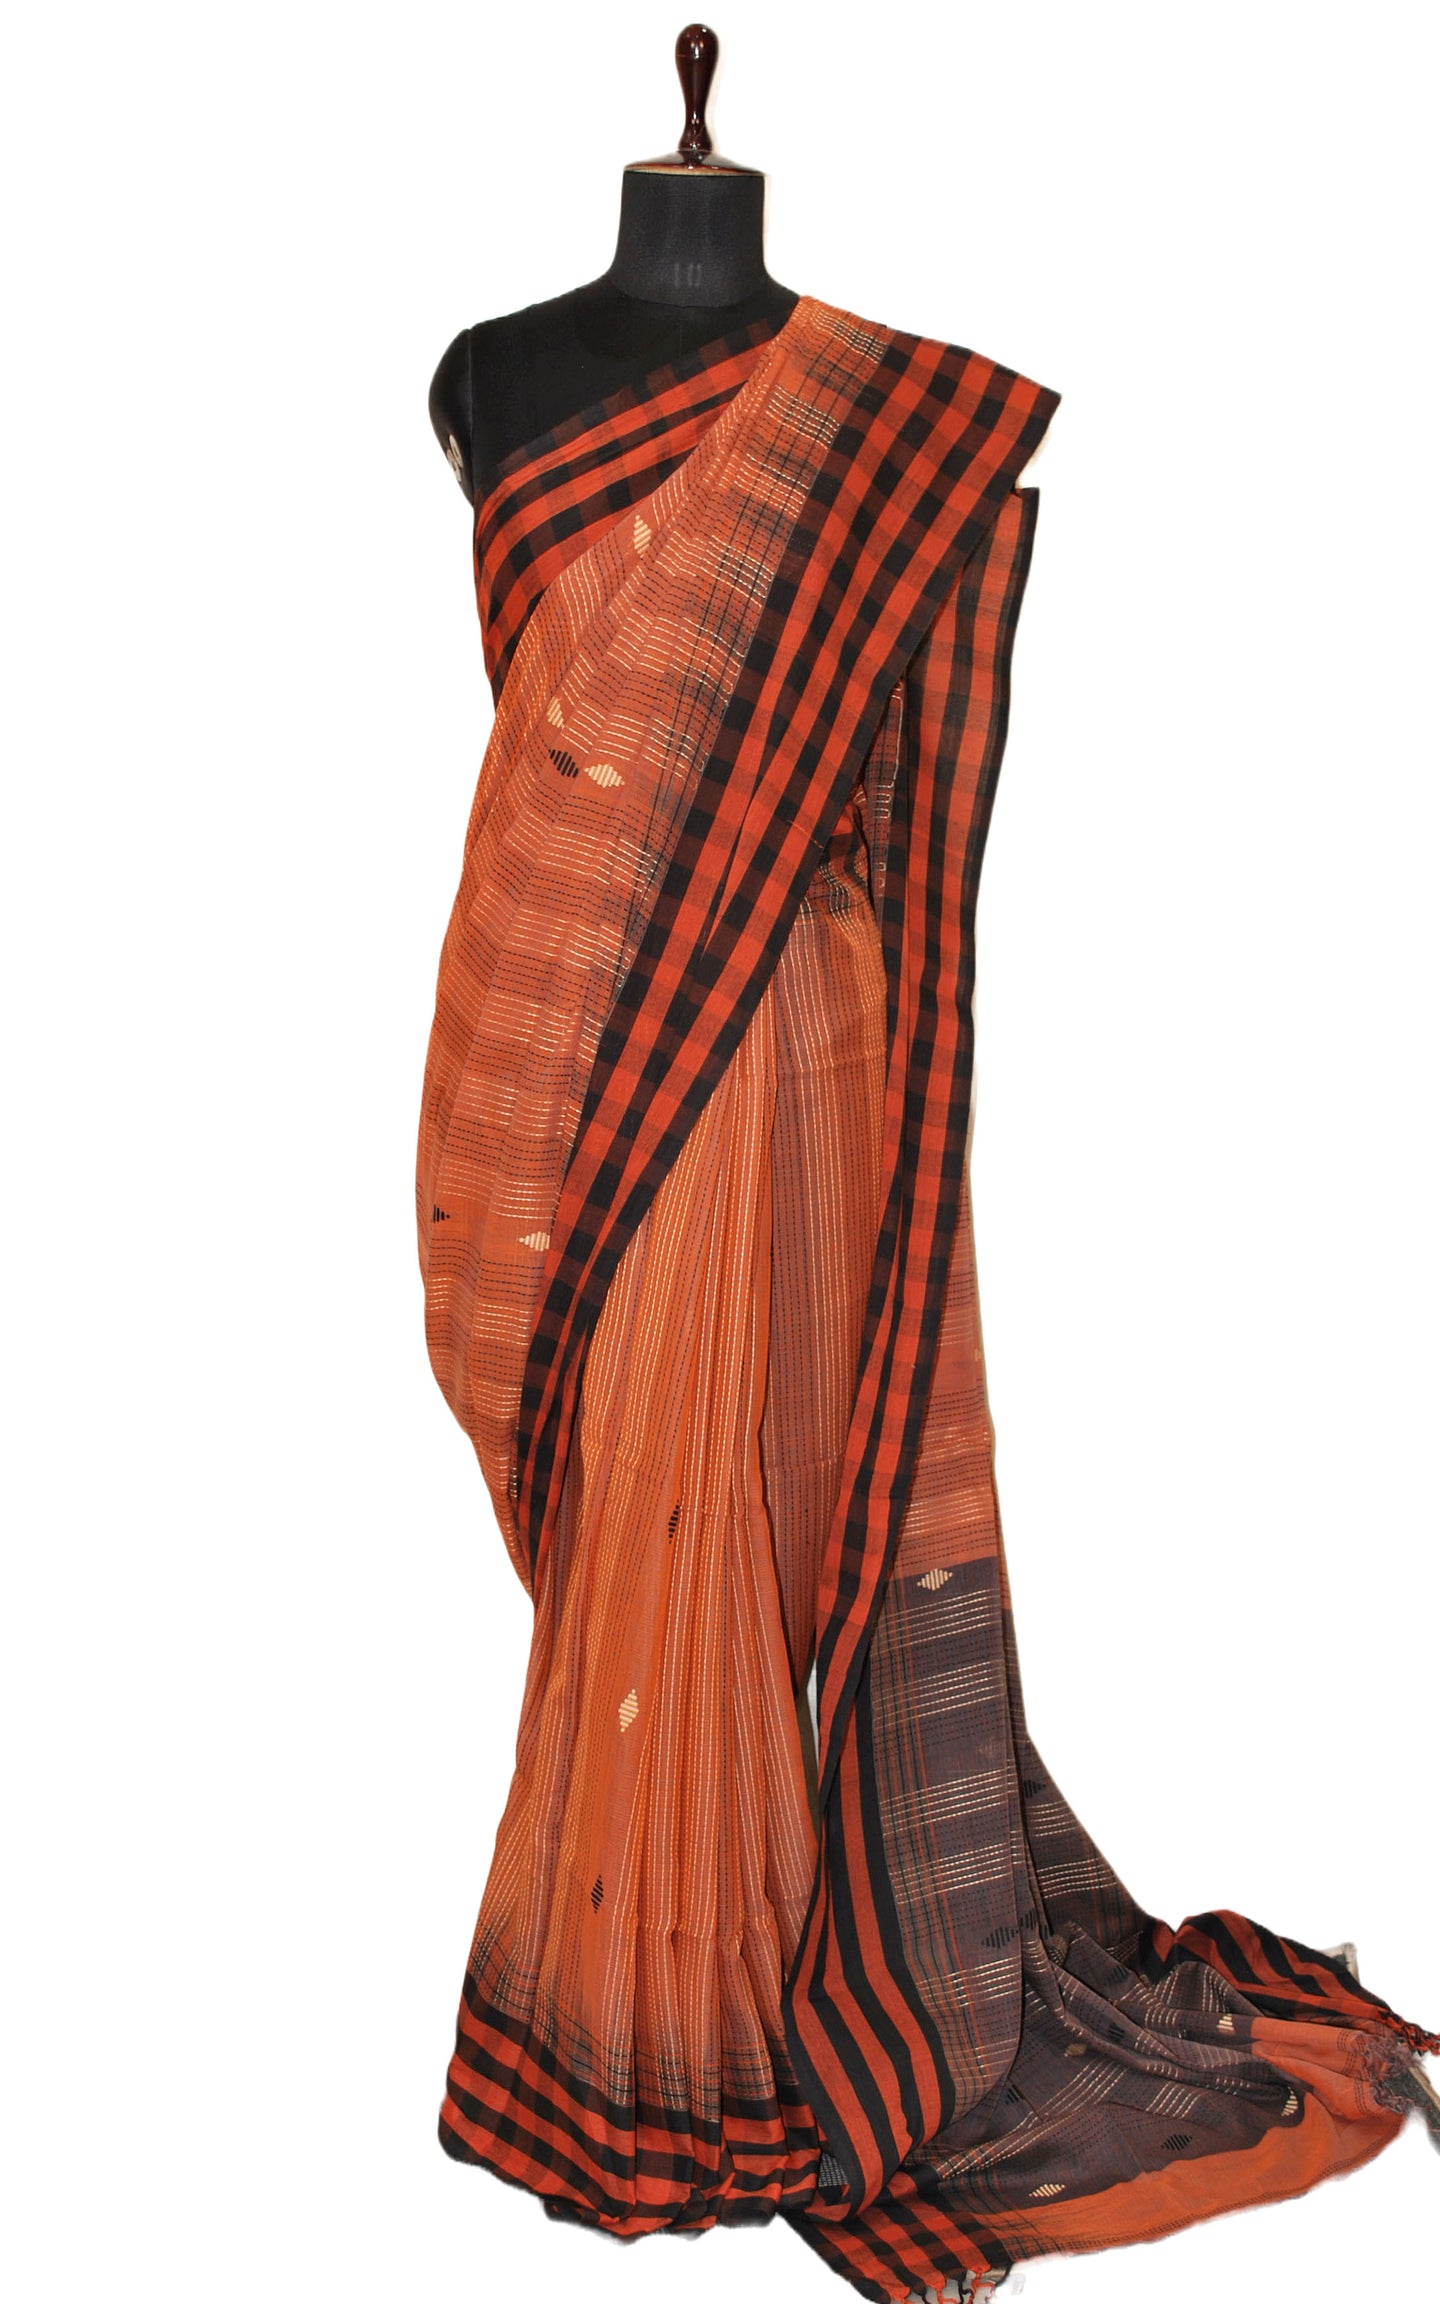 Handwoven Checks Border Soft Cotton Kalakshetra Saree in Rust Brown, Midnight Blue and Beige